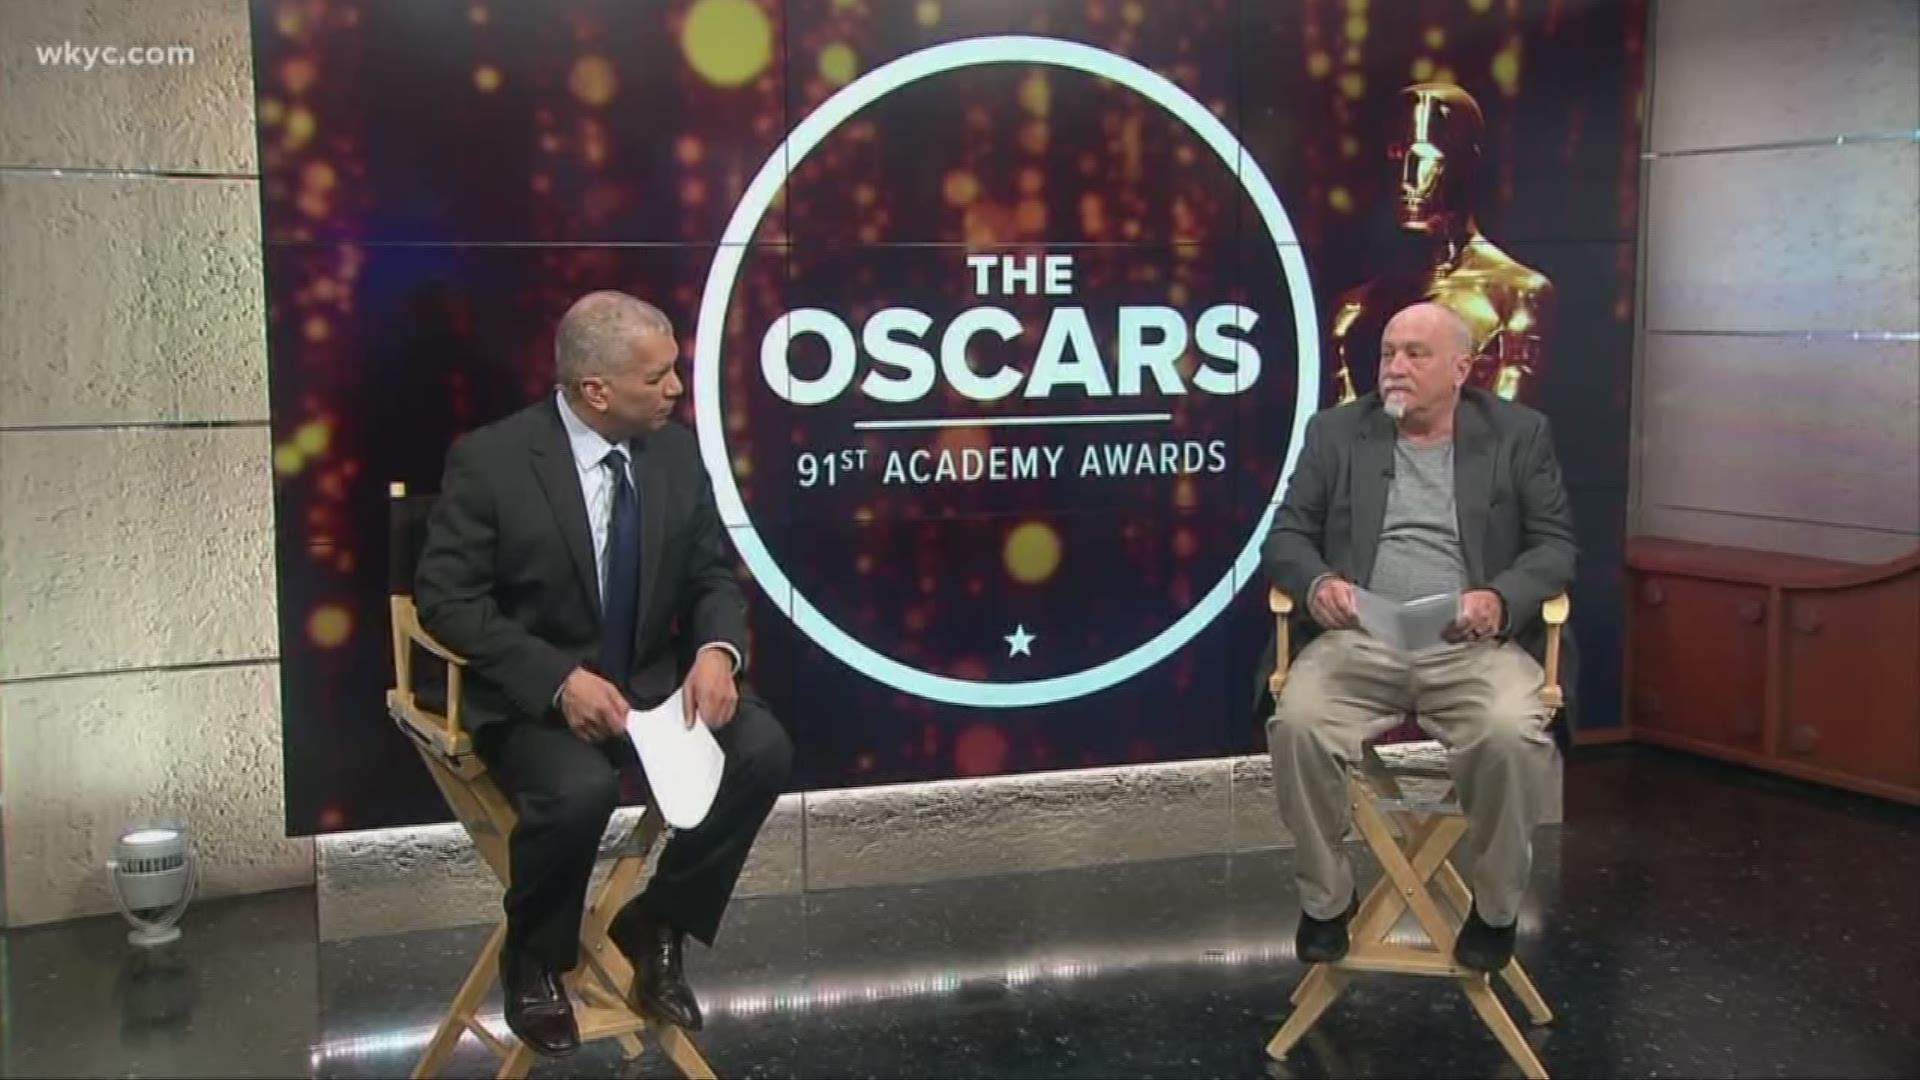 Who will take home the Academy Awards? Michael Heaton shares his predictions with us.